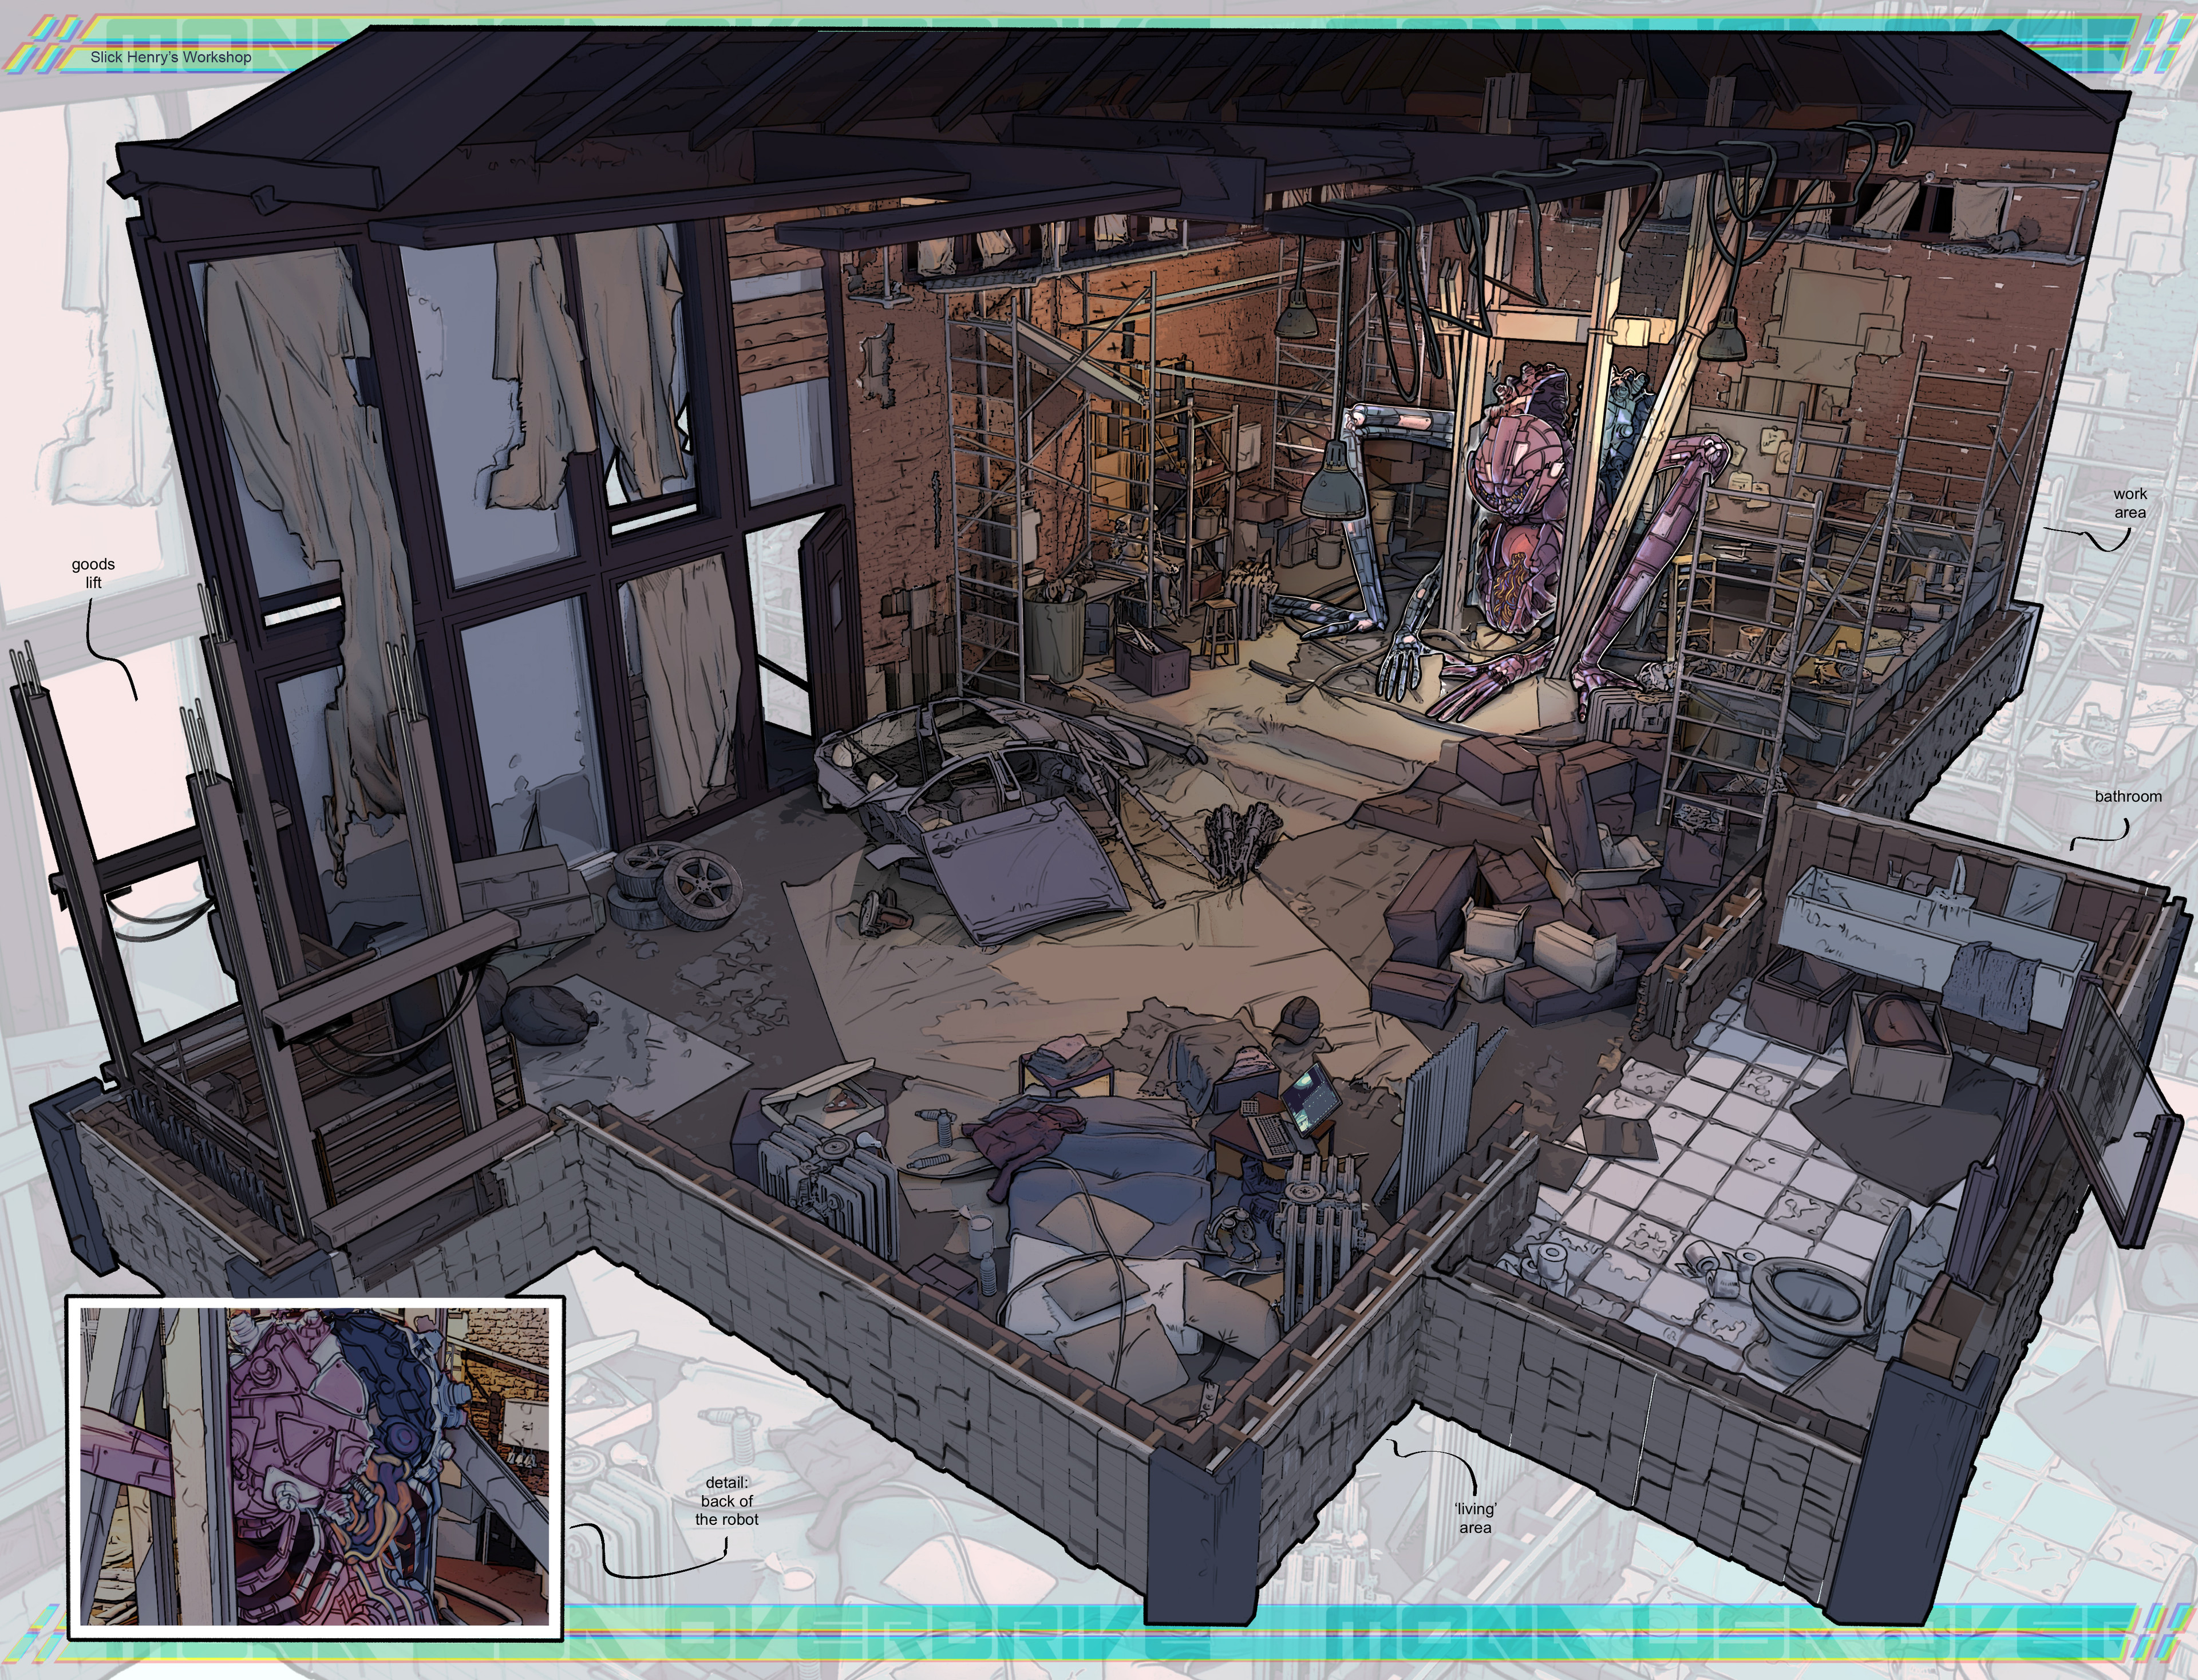 hideout/workspace of Slick Henry where he builds his sculptures with ramshackle equipment and parts he scavenges wherever he can find them.
